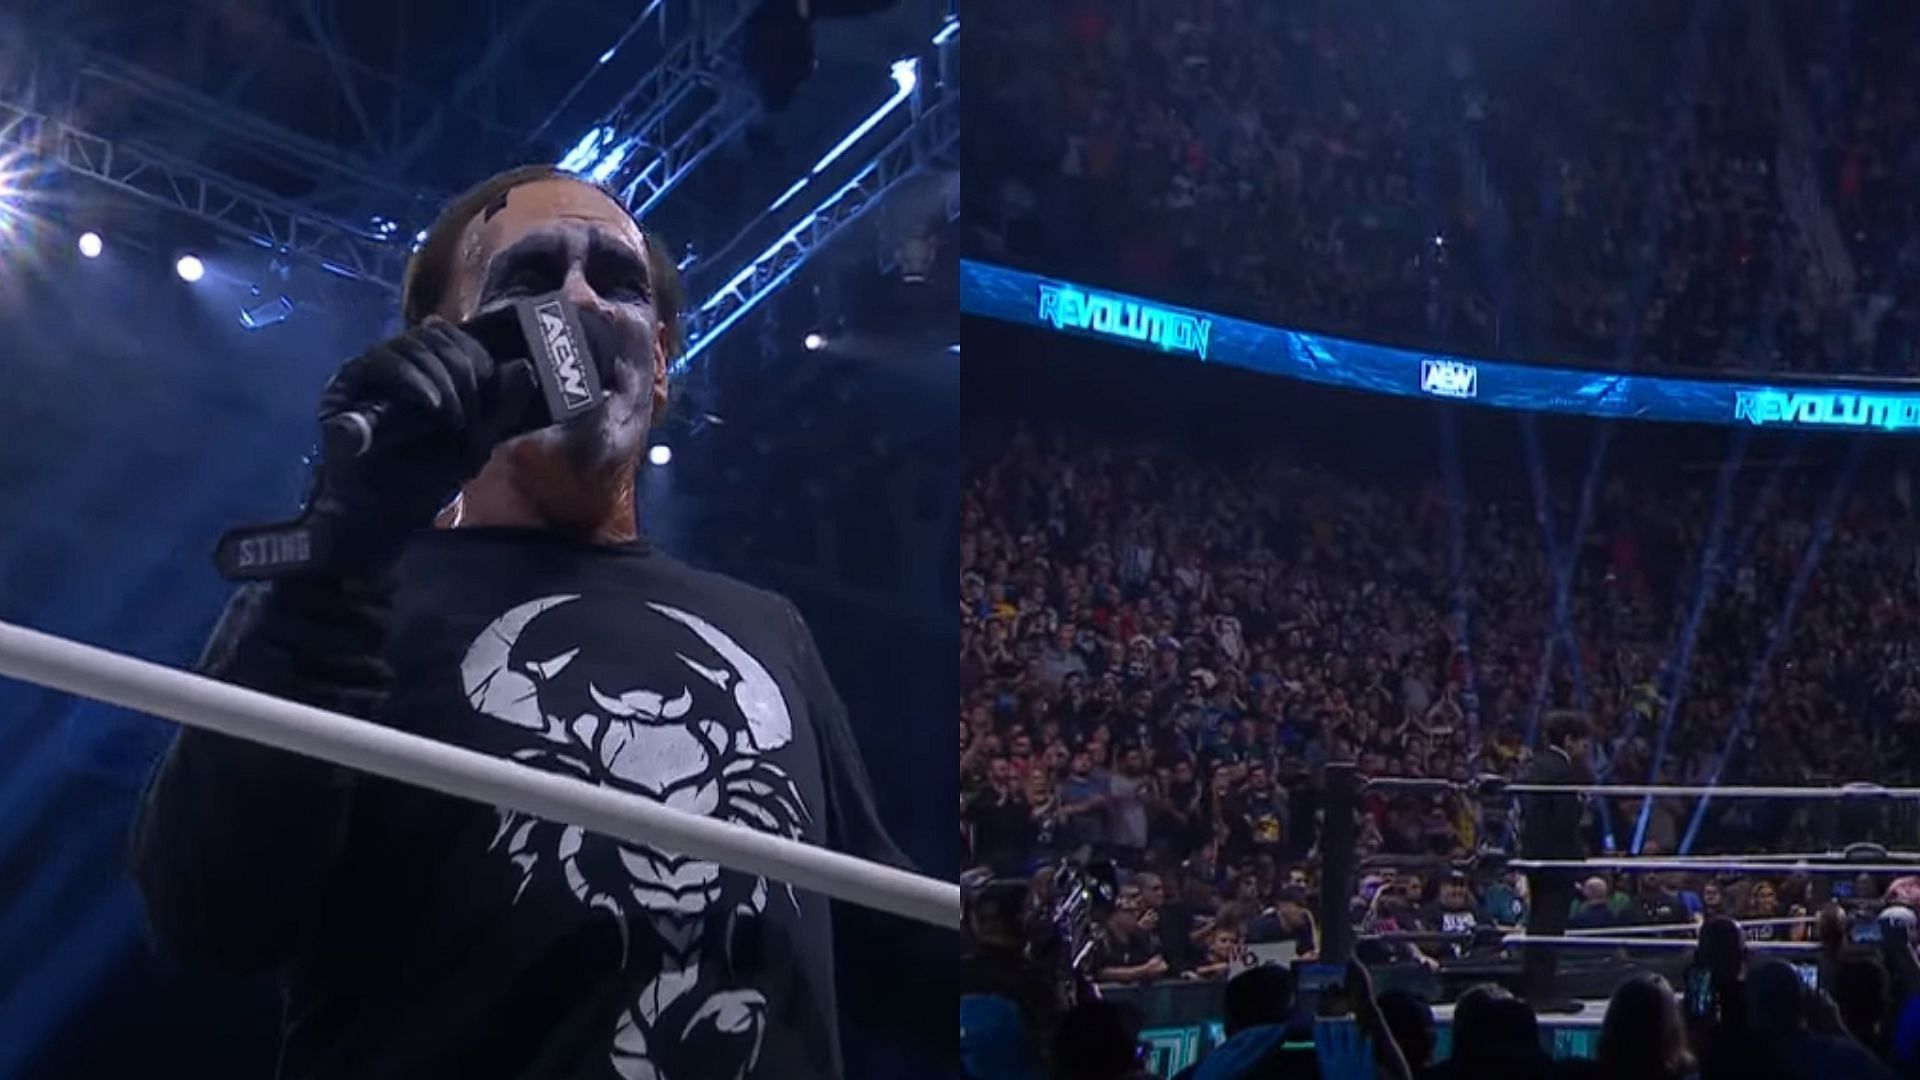 Sting competed in his retirement match tonight at Revolution [Photo courtesy of AEW